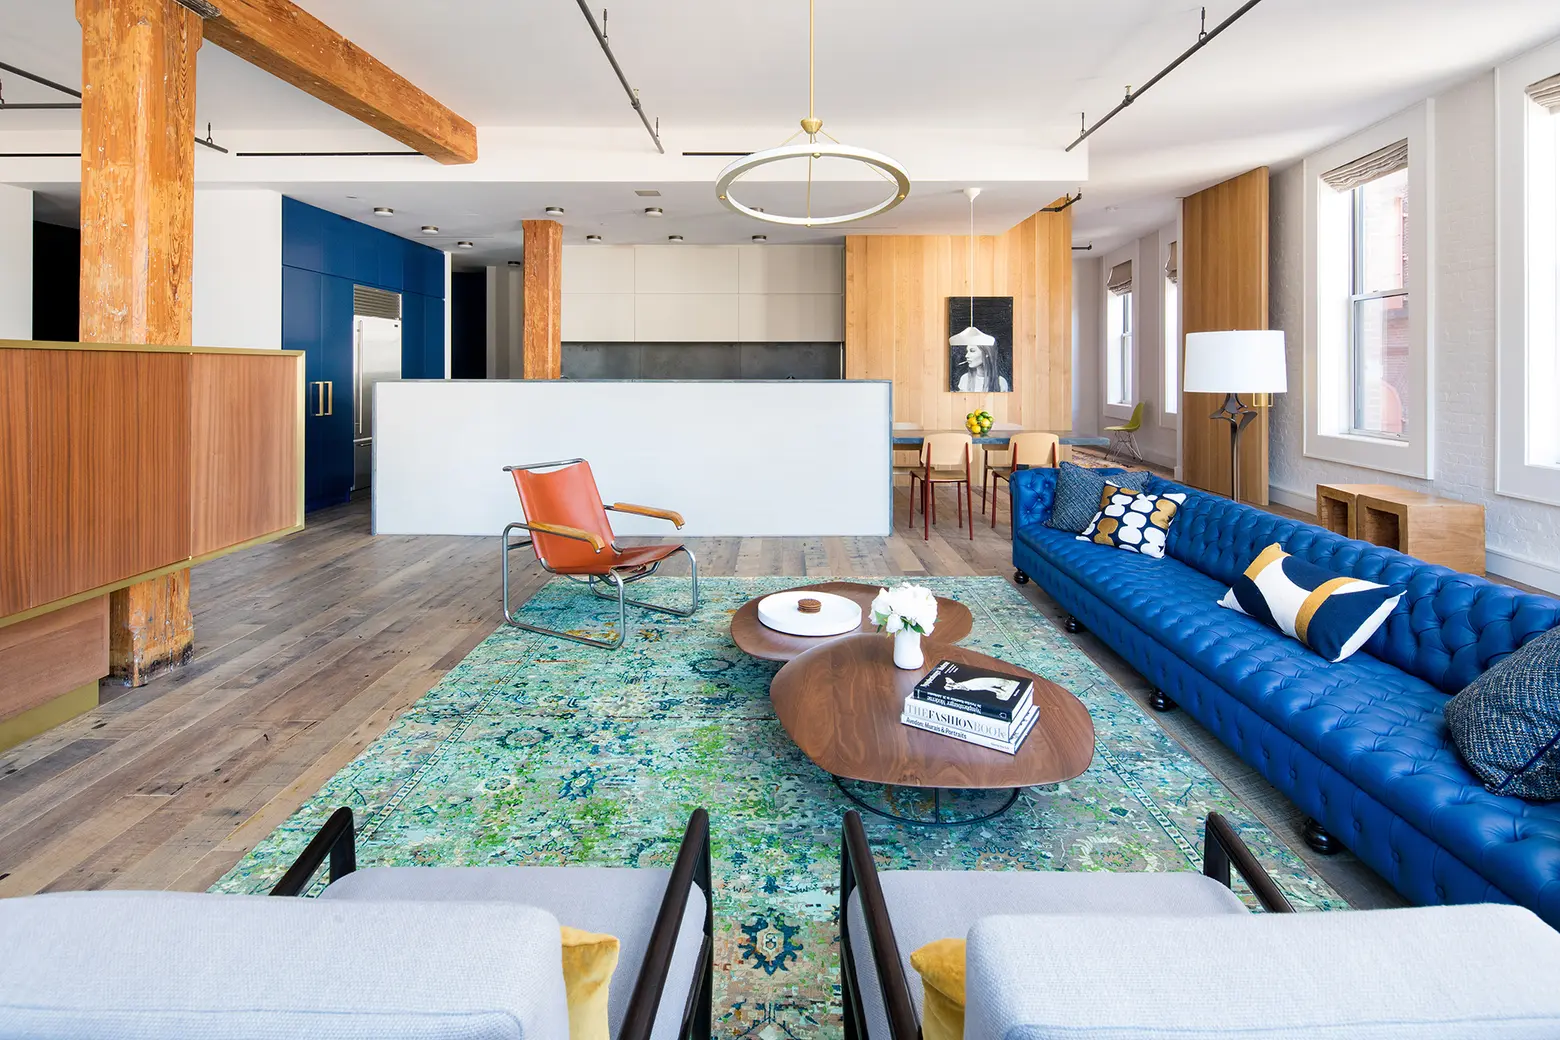 $20K/month Nolita loft is colorful, modern, and above a library